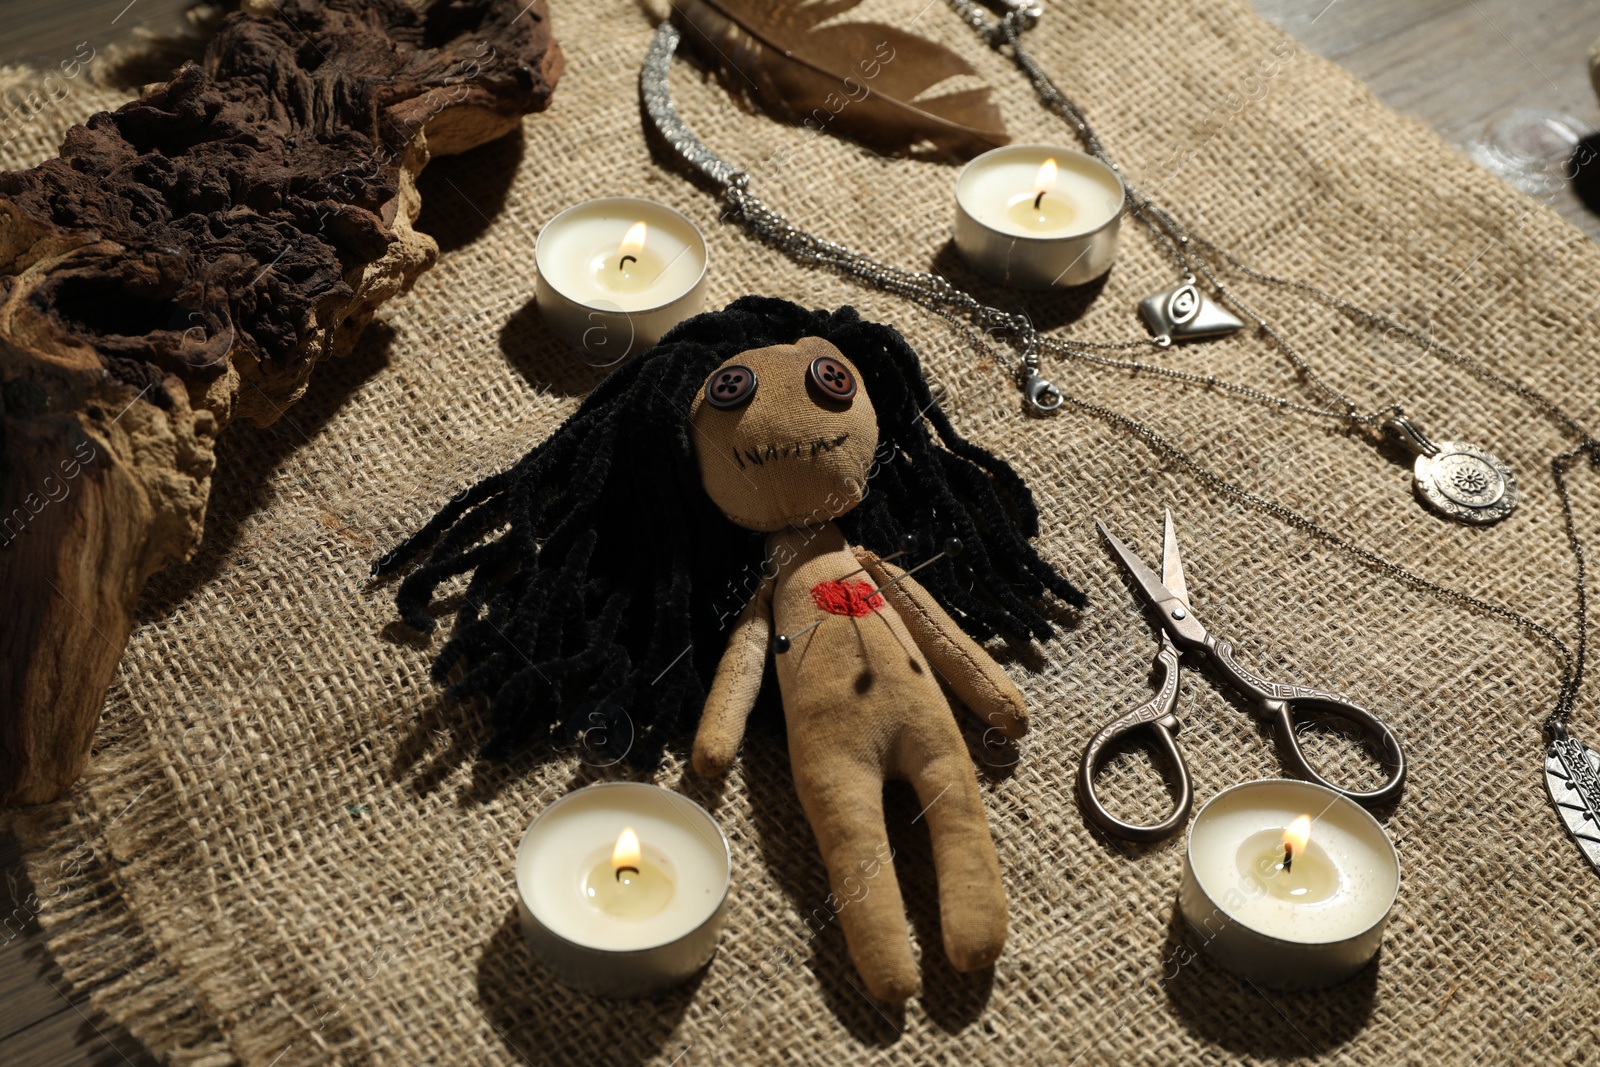 Photo of Voodoo doll with pins surrounded by ceremonial items on burlap fabric